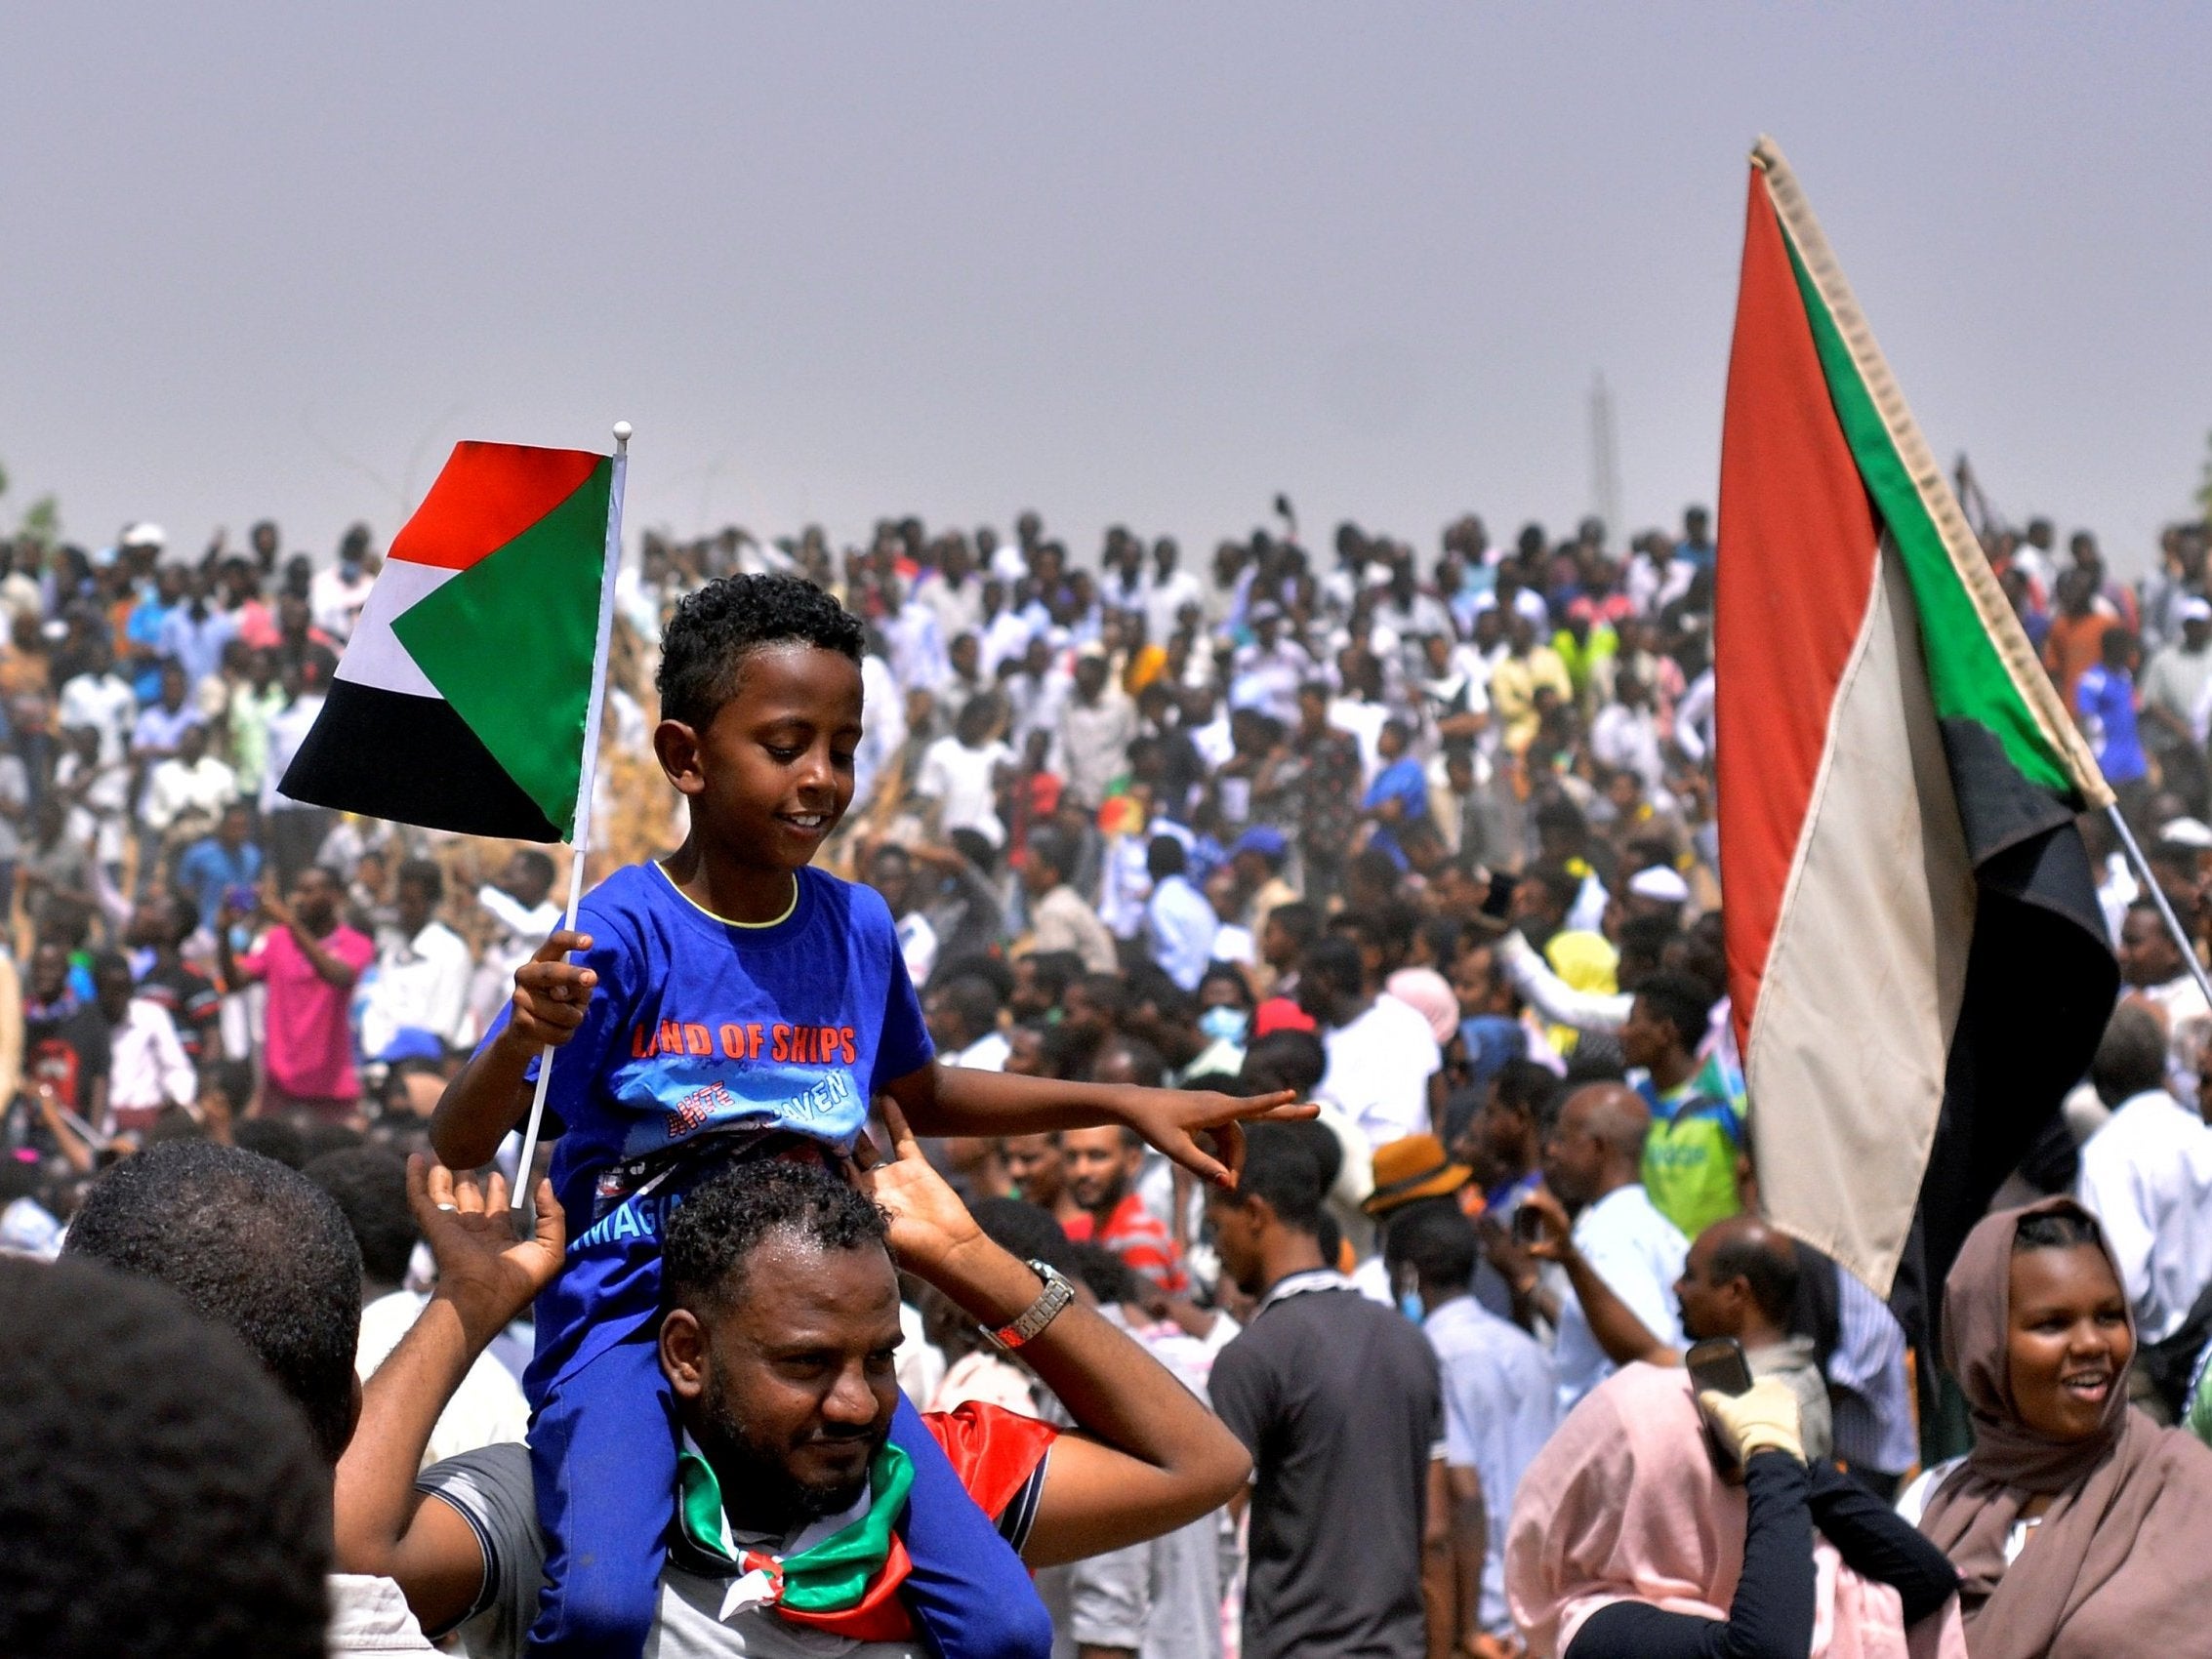 Demonstrators chant slogans and carry Sudanese flags in Khartoum yesterday